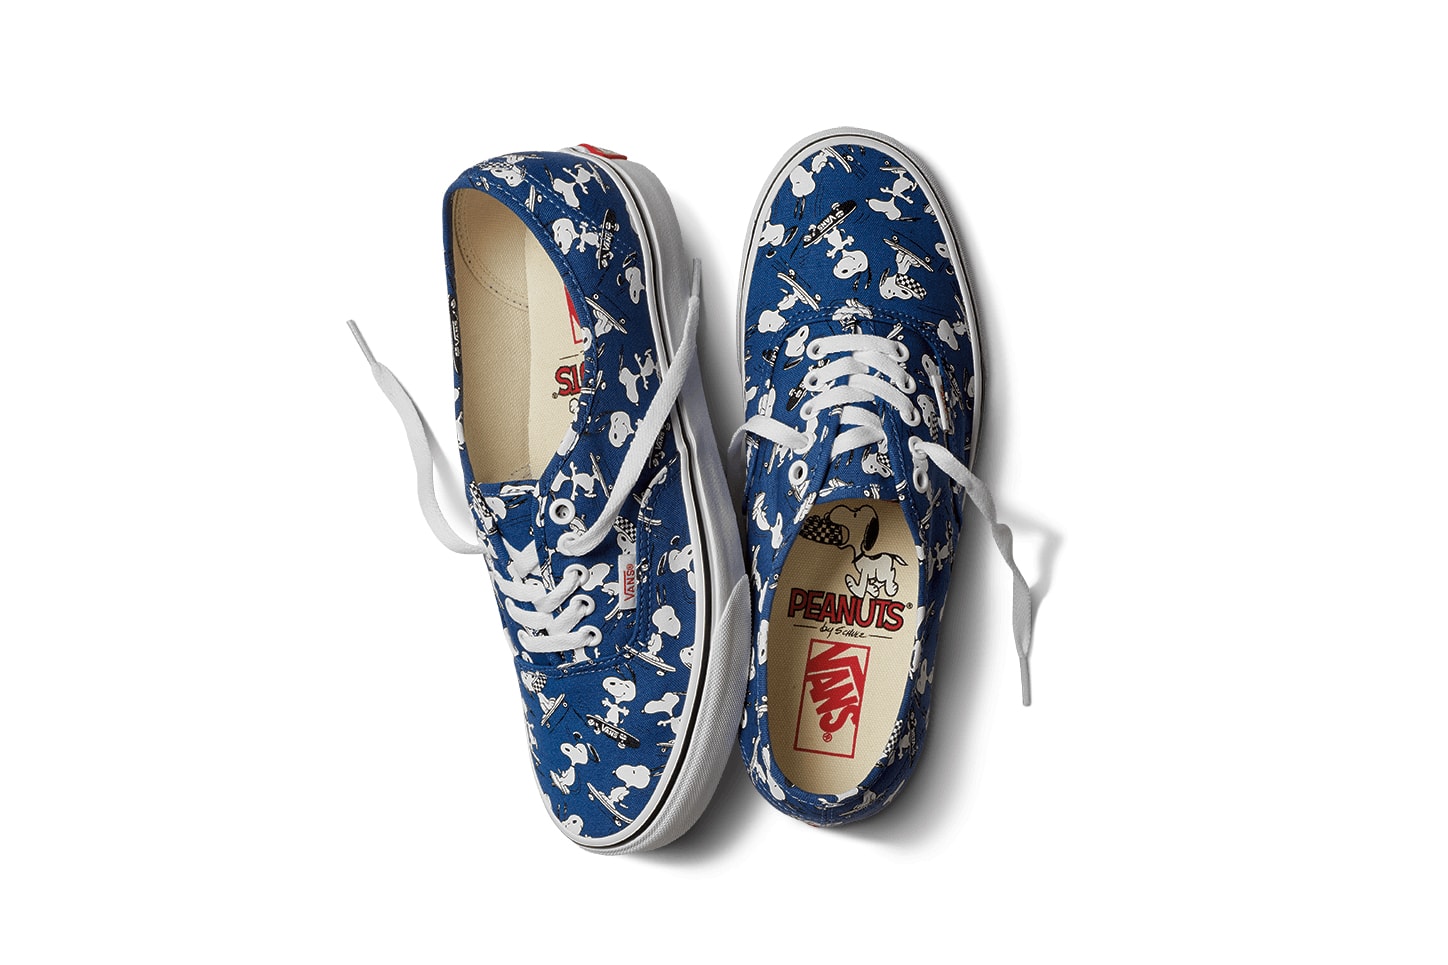 Peanuts Vans Charles Schulz Fashion Apparel Clothing Footwear Collaboration Exclusive